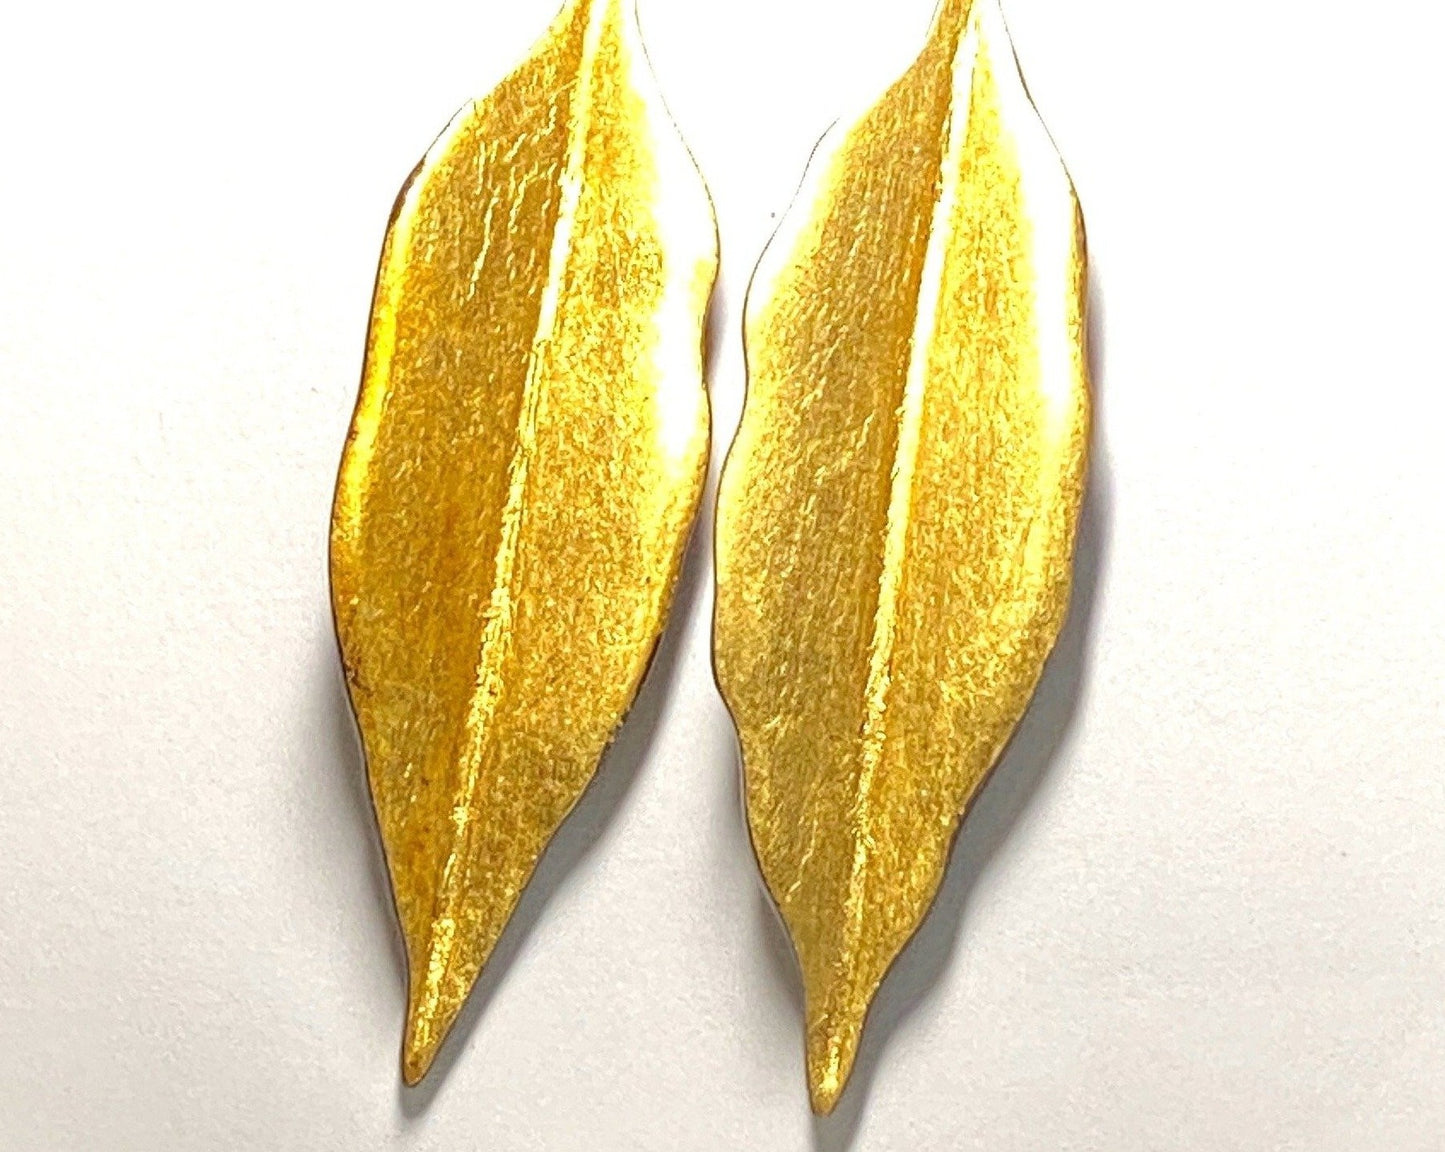 Ebony wood, gold leaf and sterling silver earrings in the shape of a leaf. About 3 inches long.